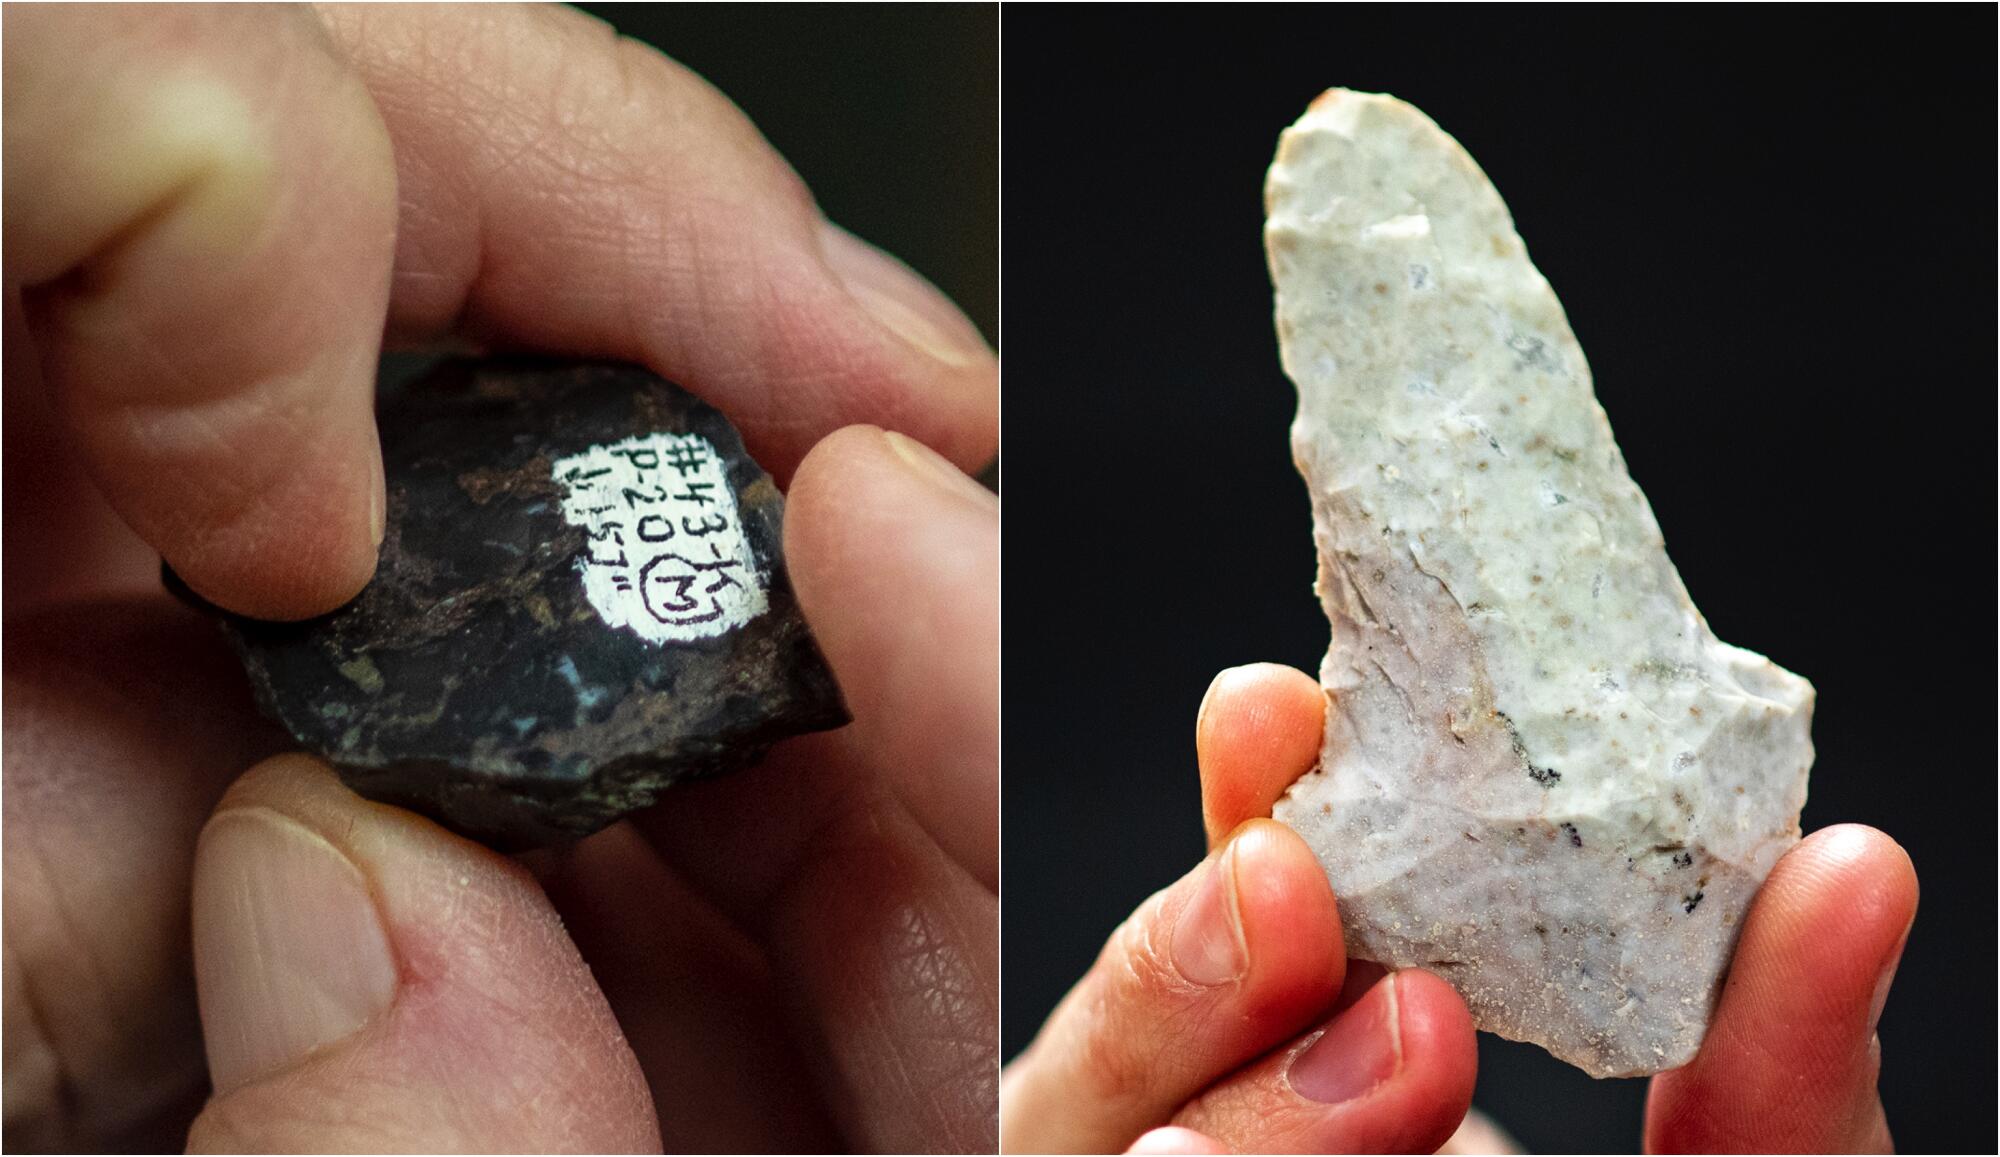 Two close-up images of hands holding ancient stone cutting and engraving tools